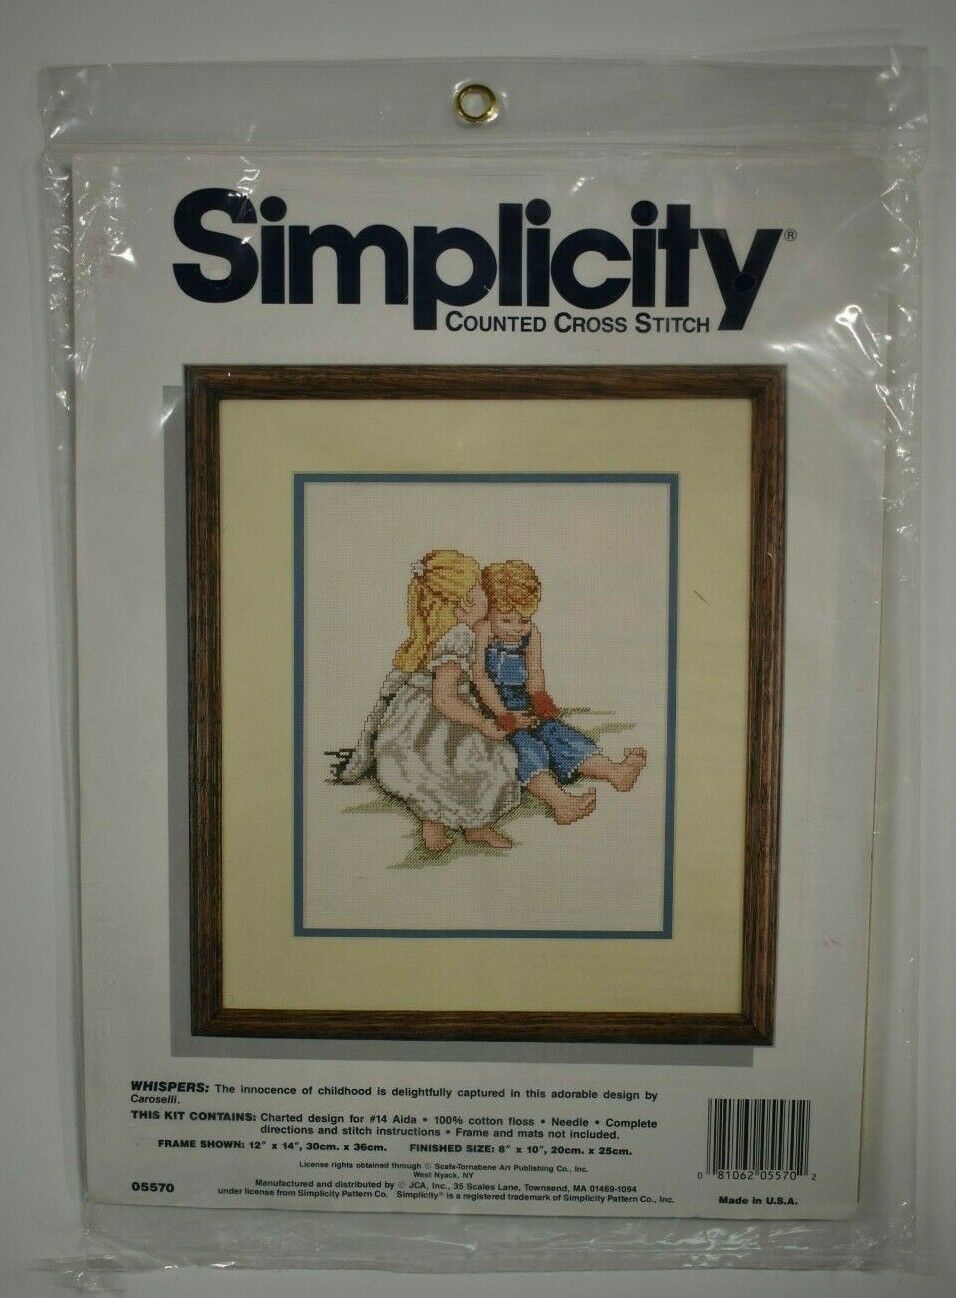 Primary image for Simplicity Counted Cross Stitch Kit Whispers Children Boy Girl 05570